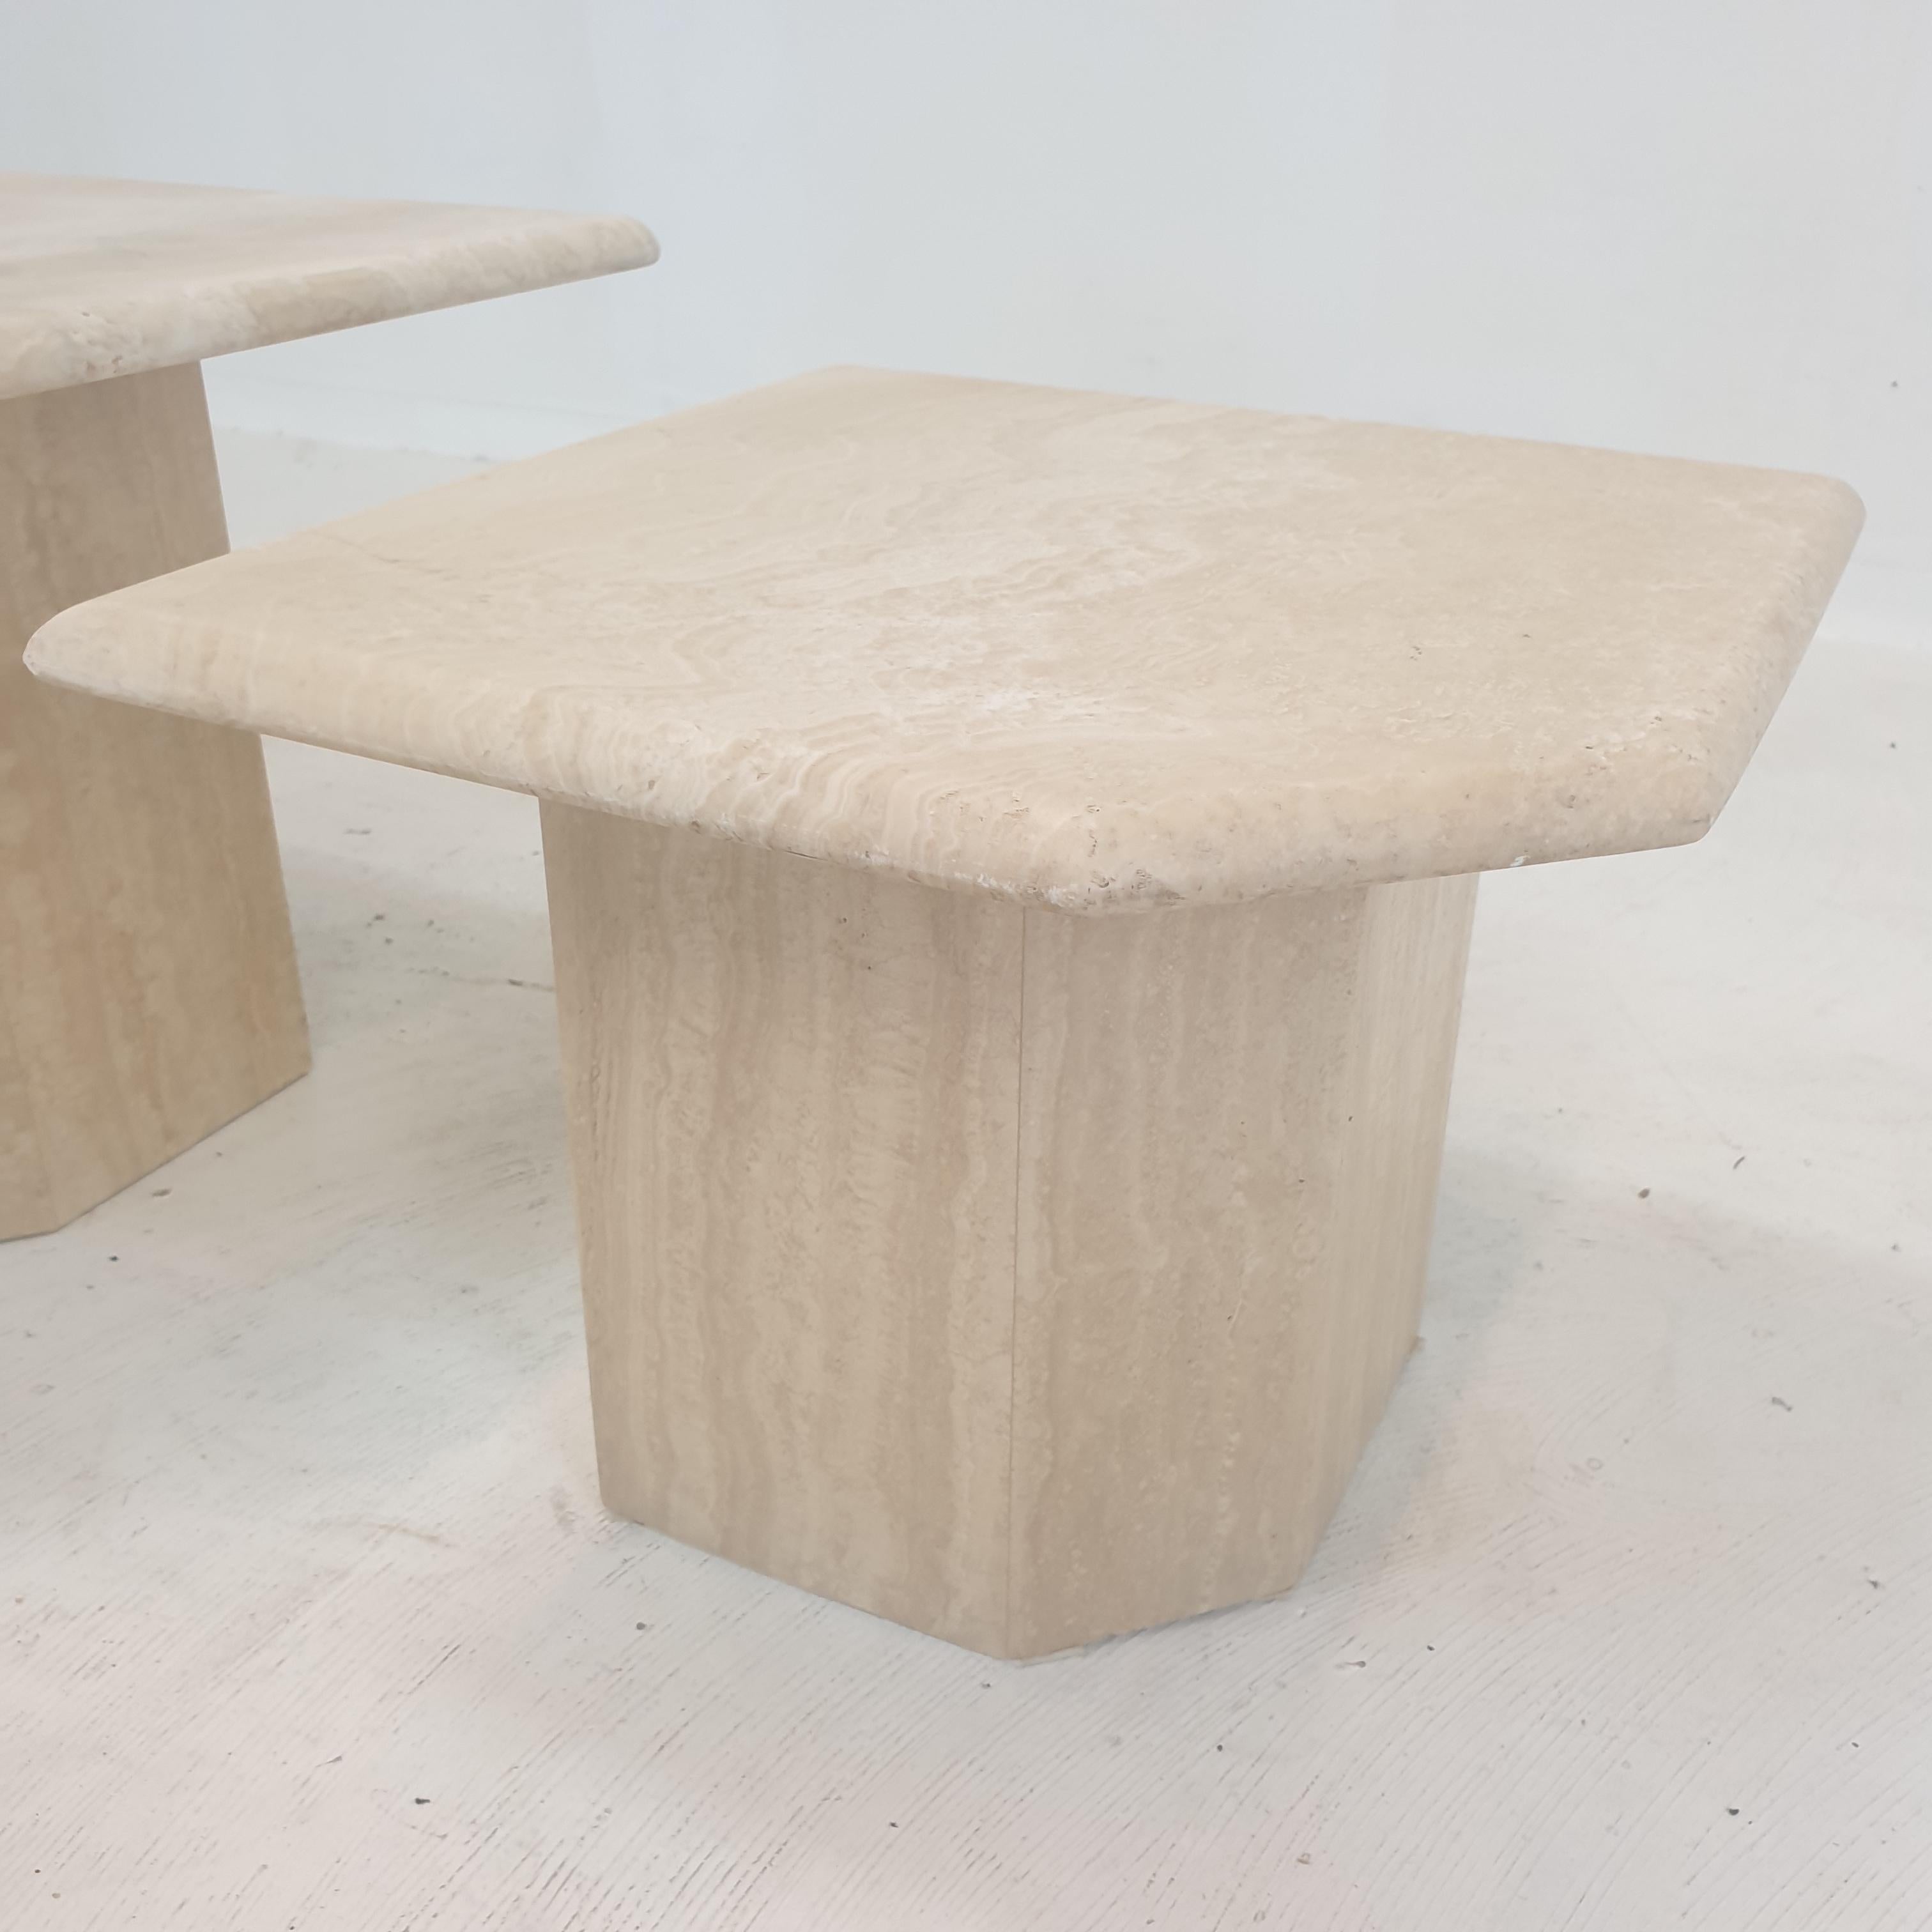 Set of 3 Italian Travertine Coffee or Side Tables, 1980s For Sale 12